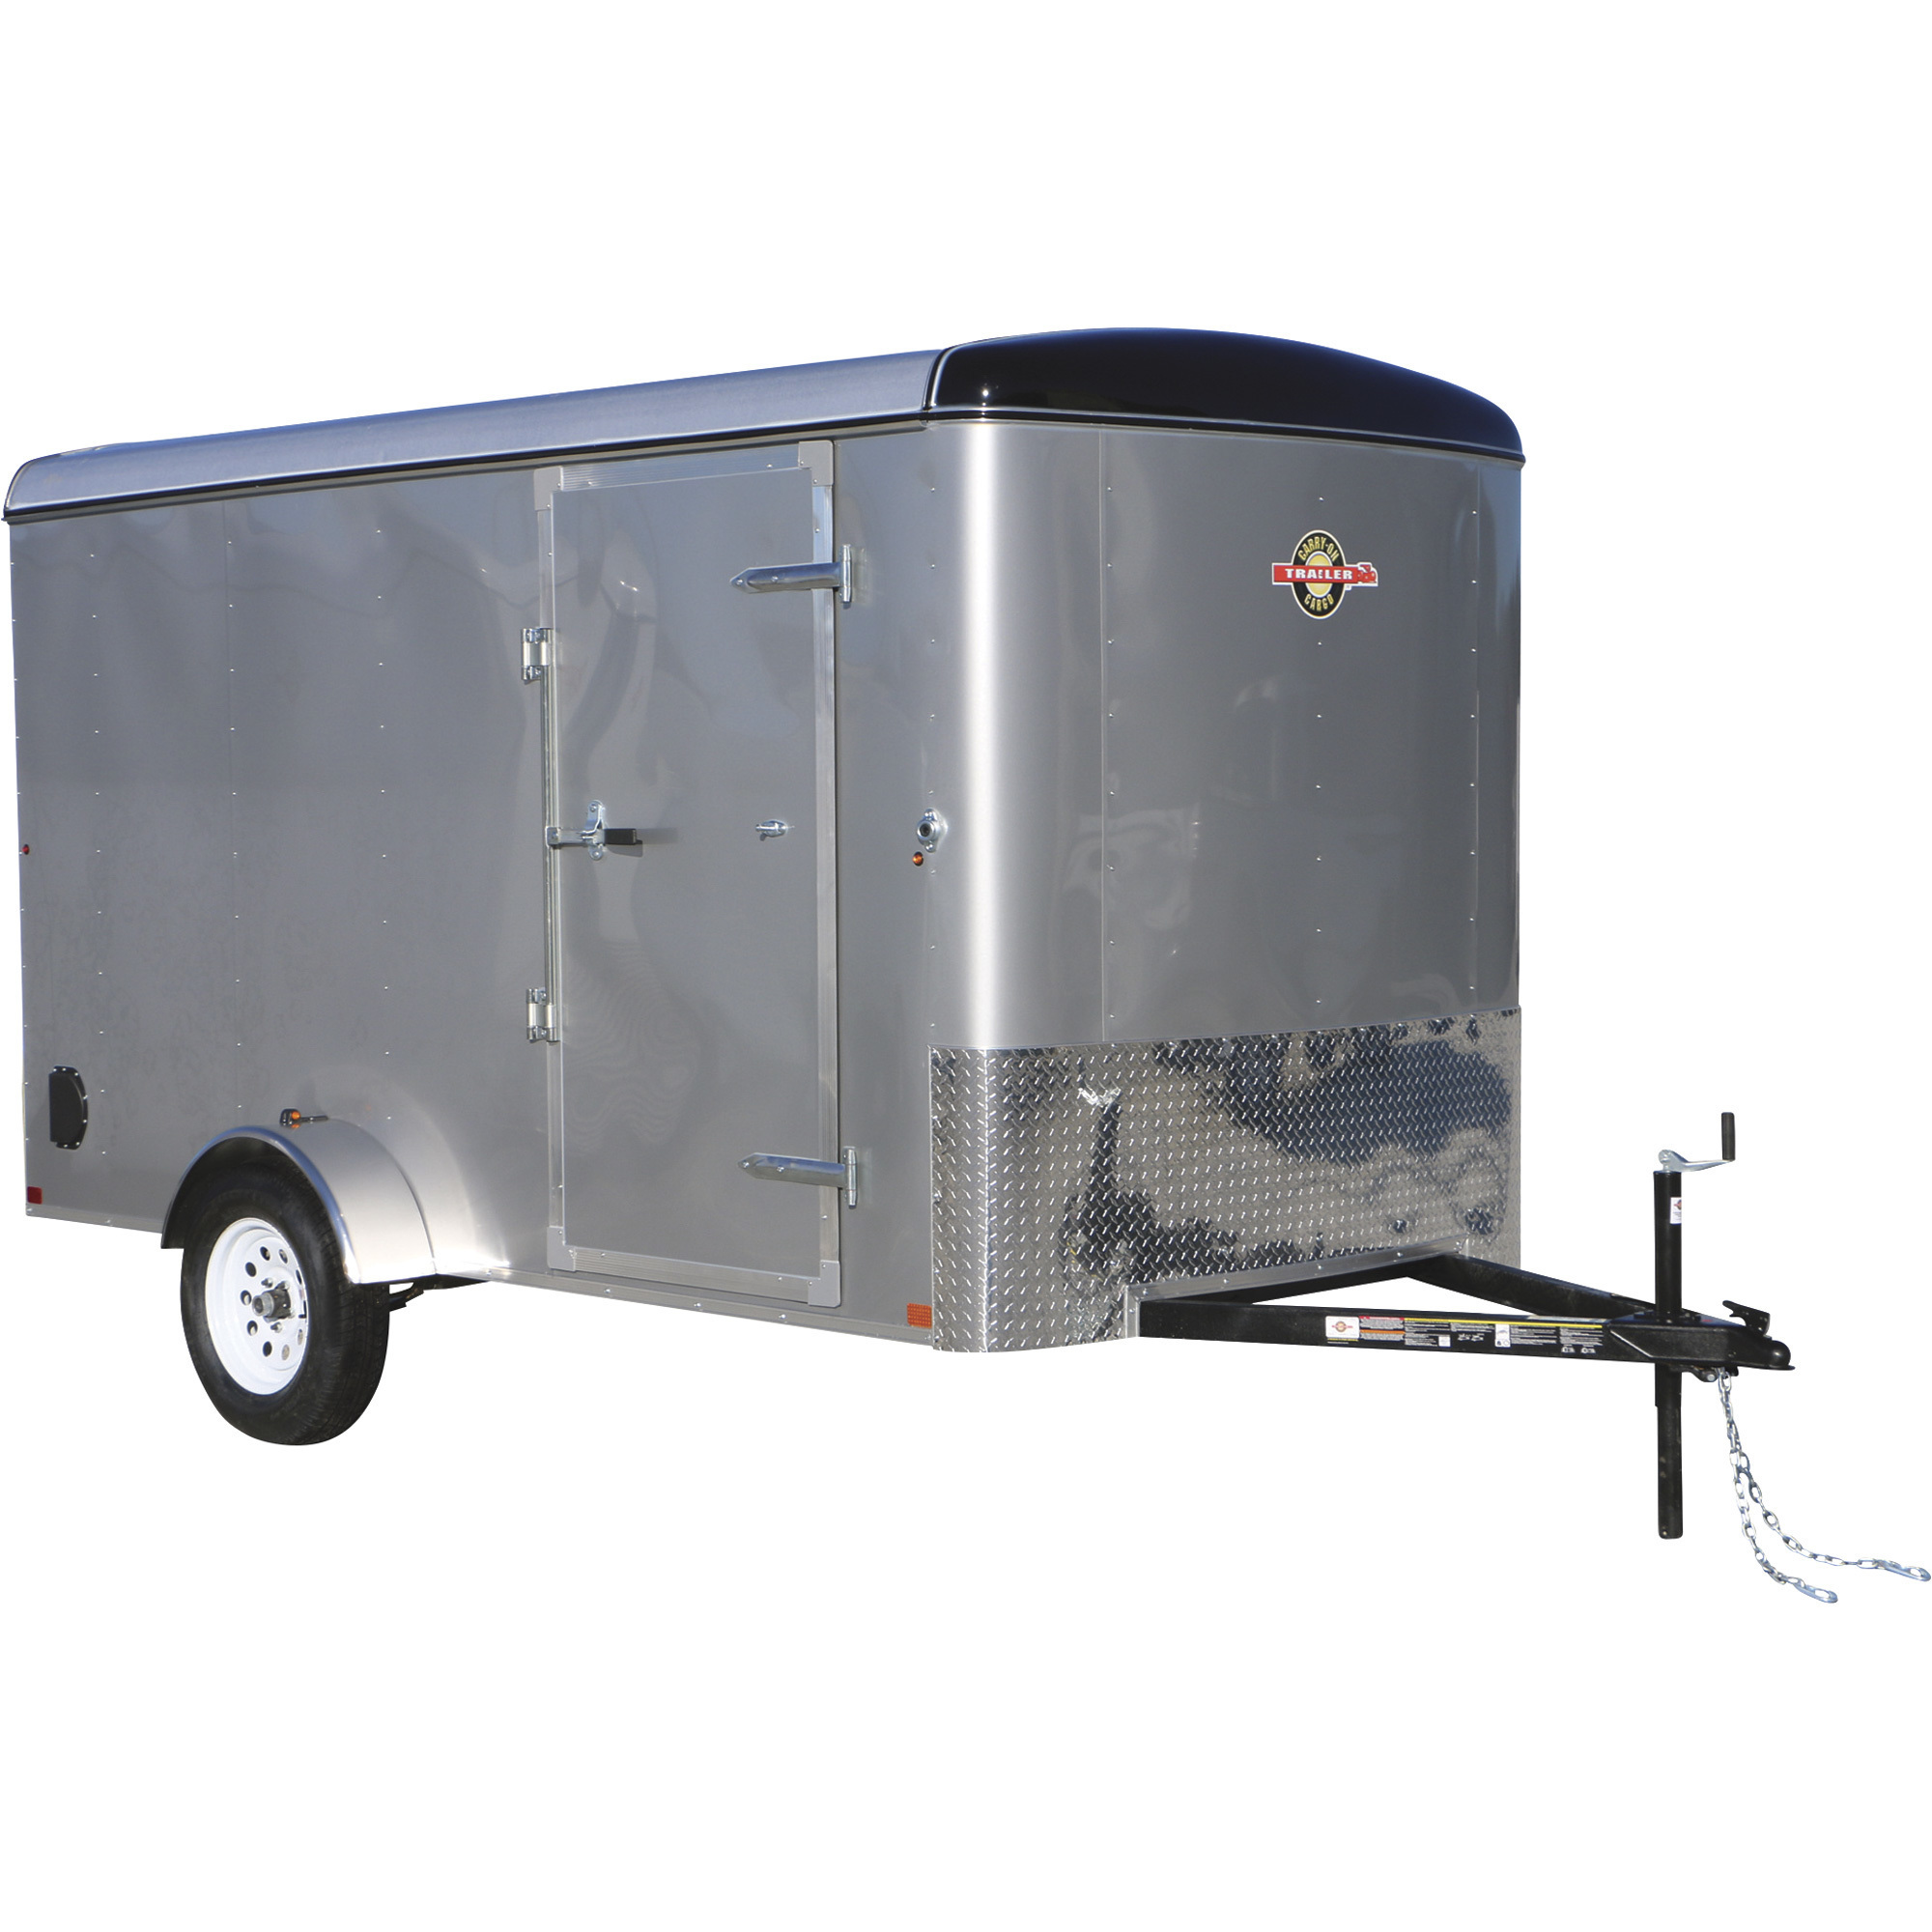 Carry-On Trailer 6 ft. x 12 ft. Silver Enclosed Cargo Trailer, 6X12CGR-Silver